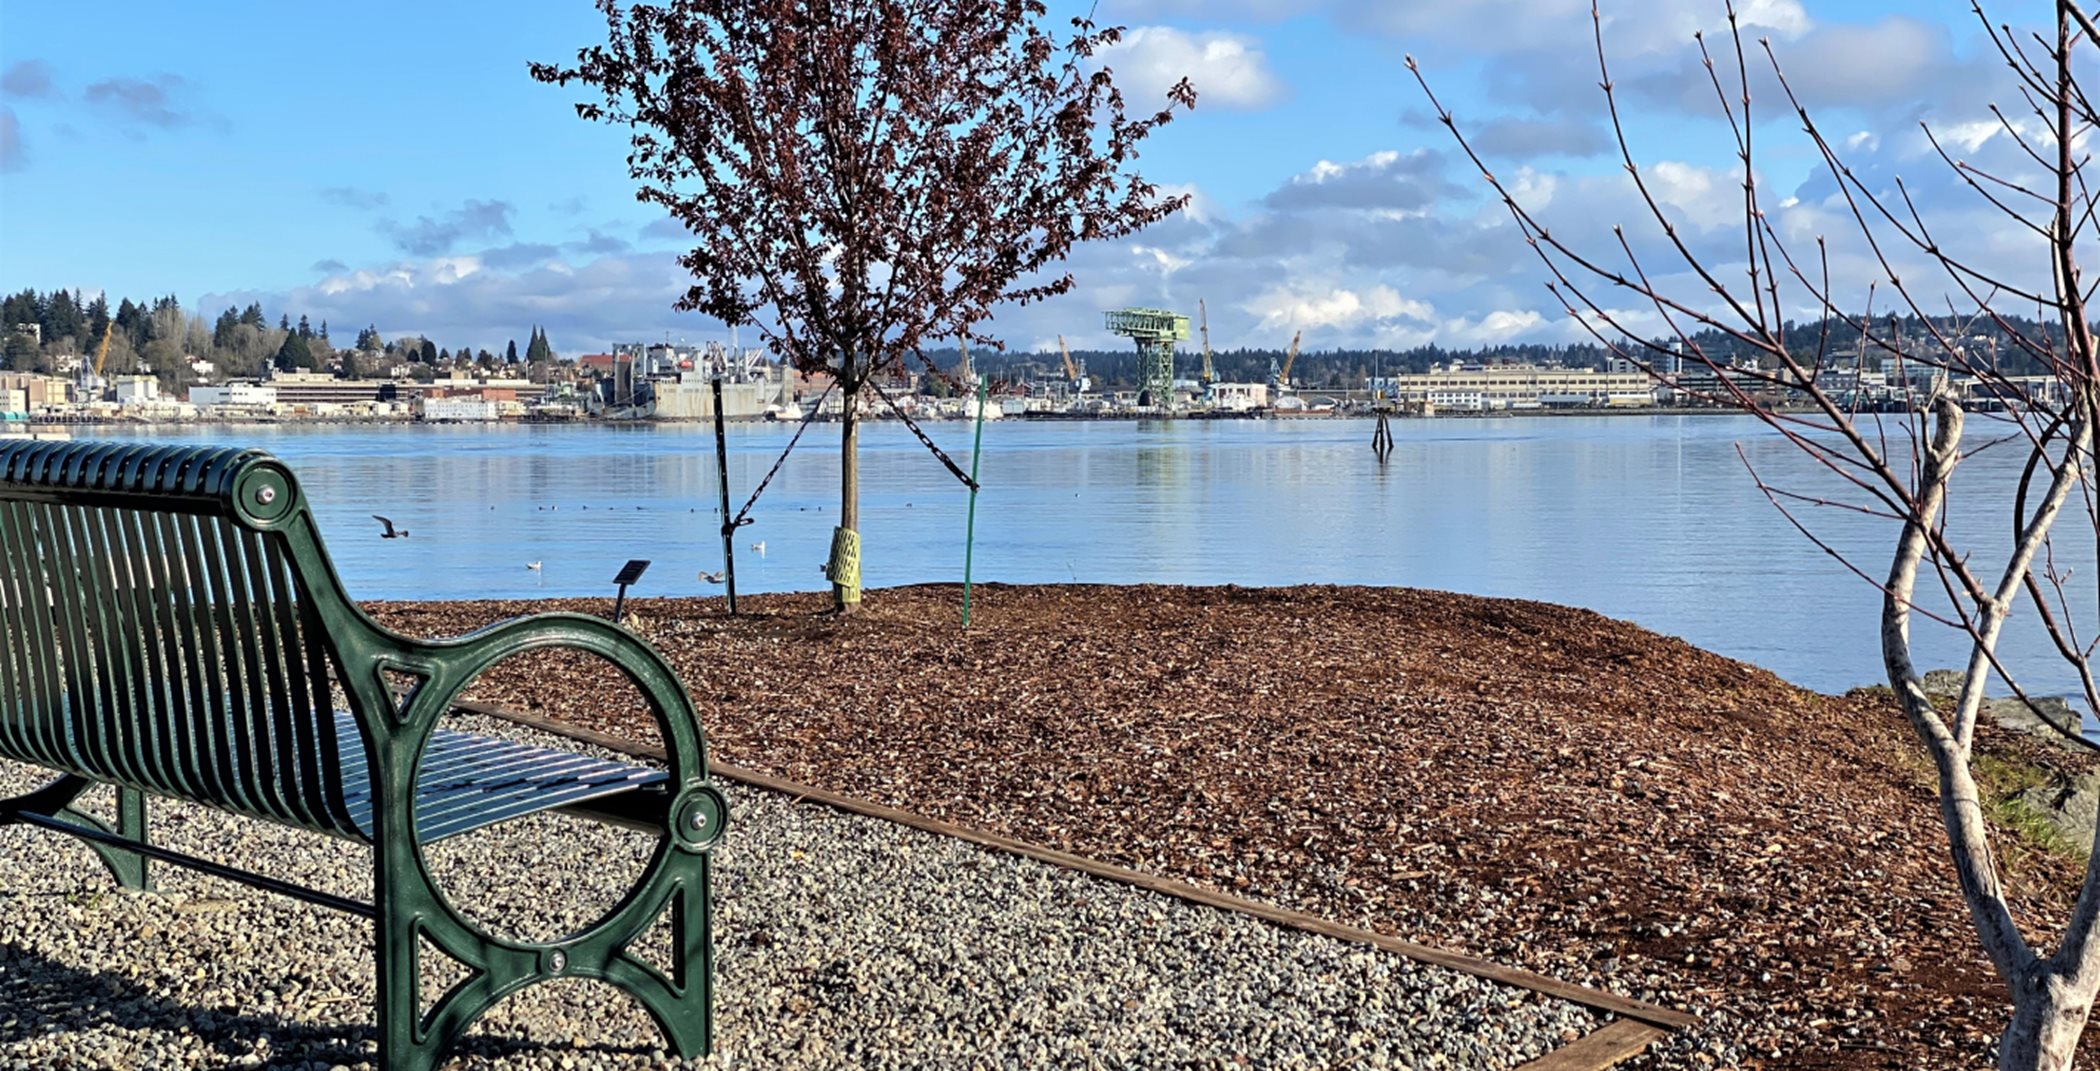 Bench overlooking the Puget Sound